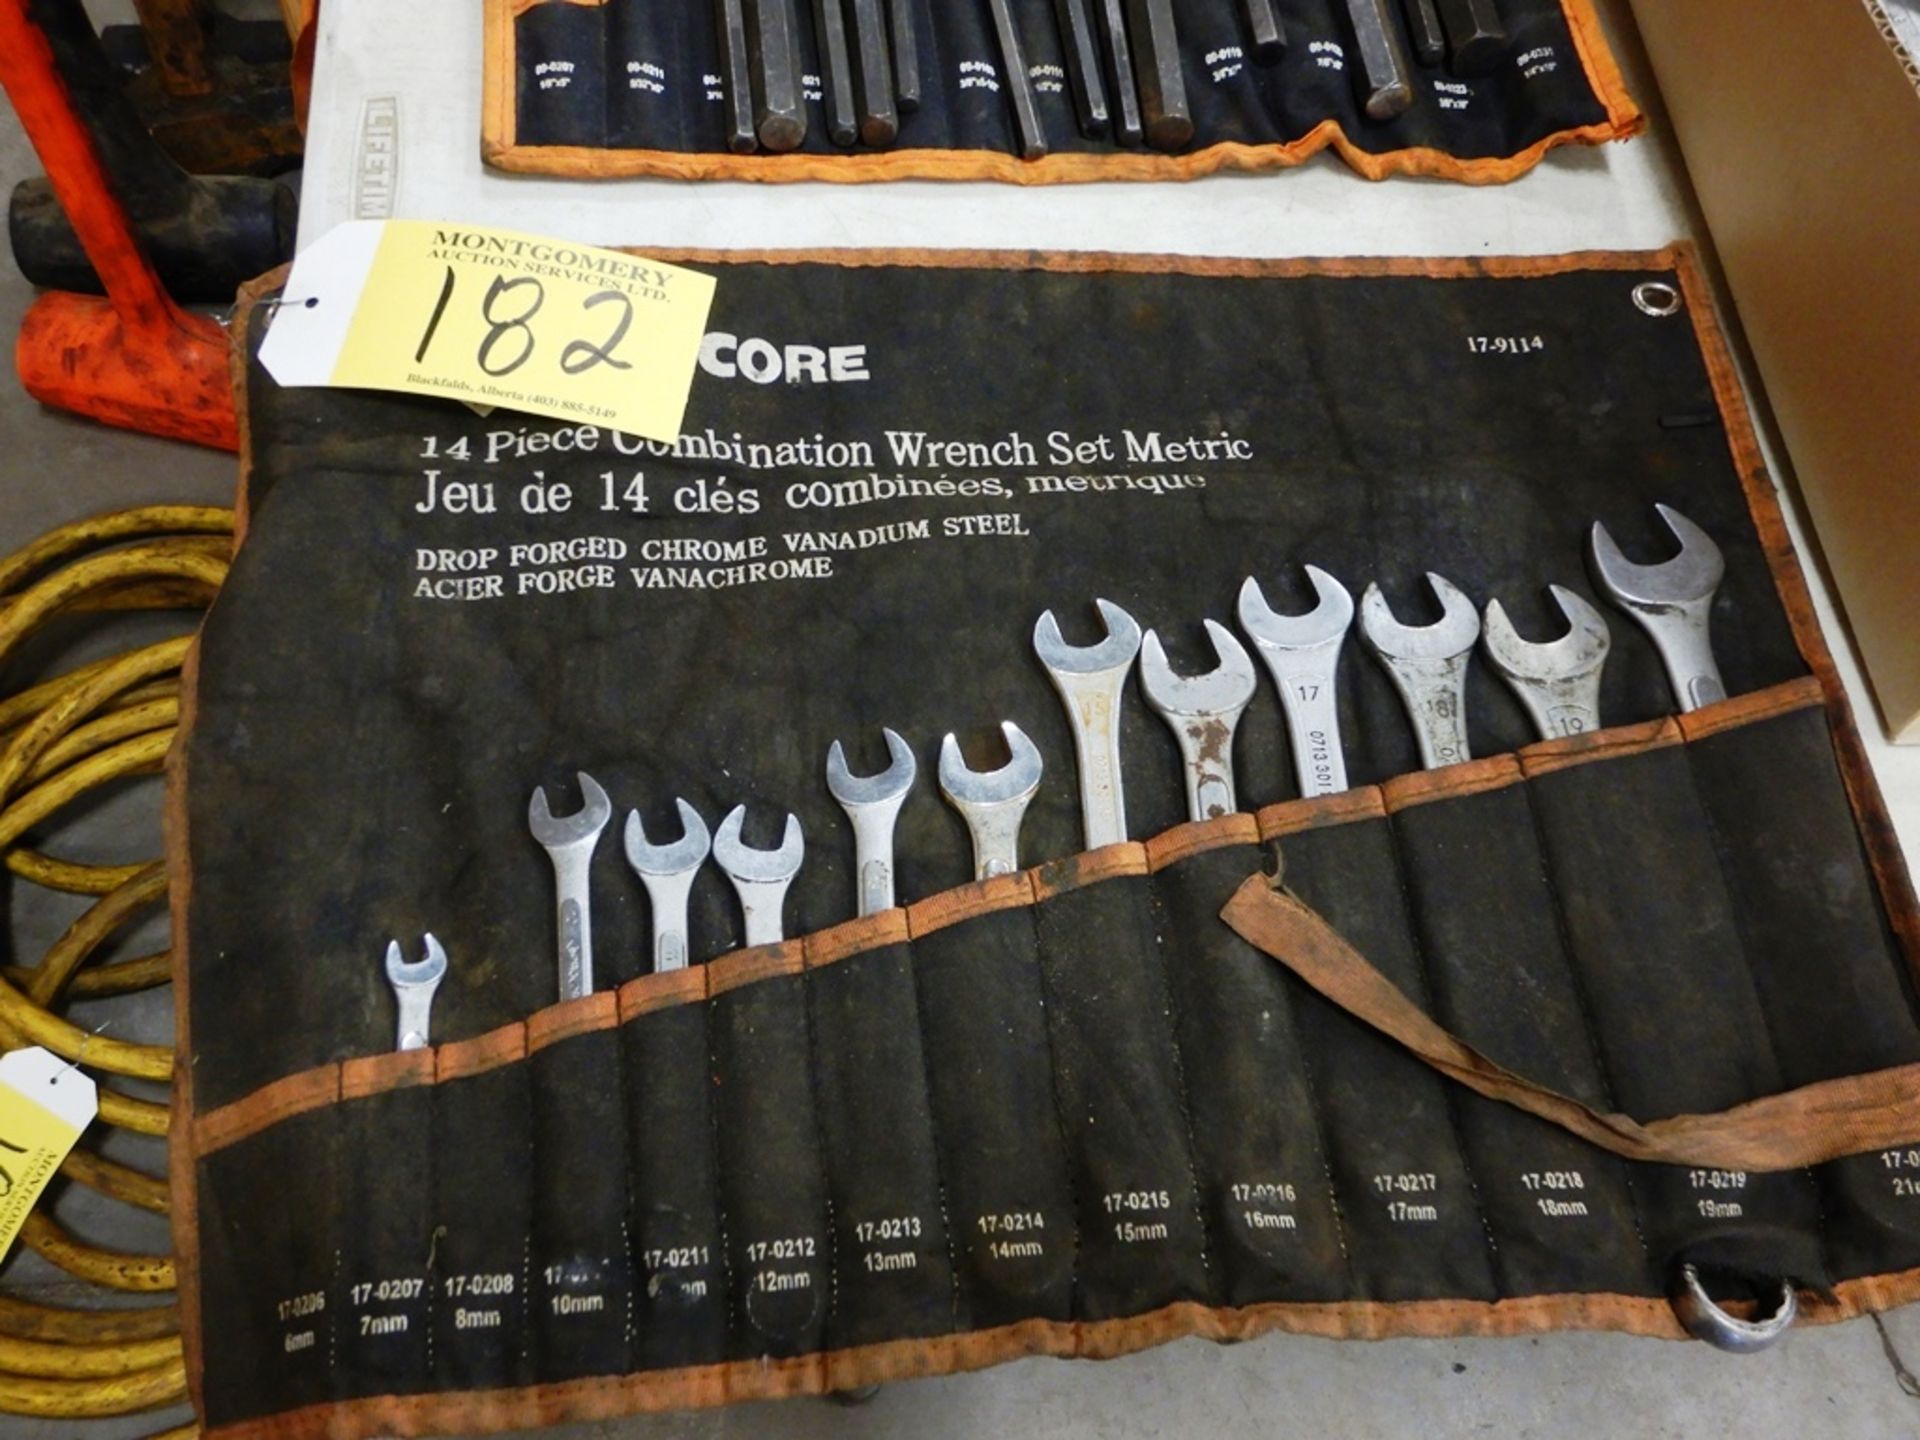 METRIC COMBINATION WRENCH SET - INCOMPLETE